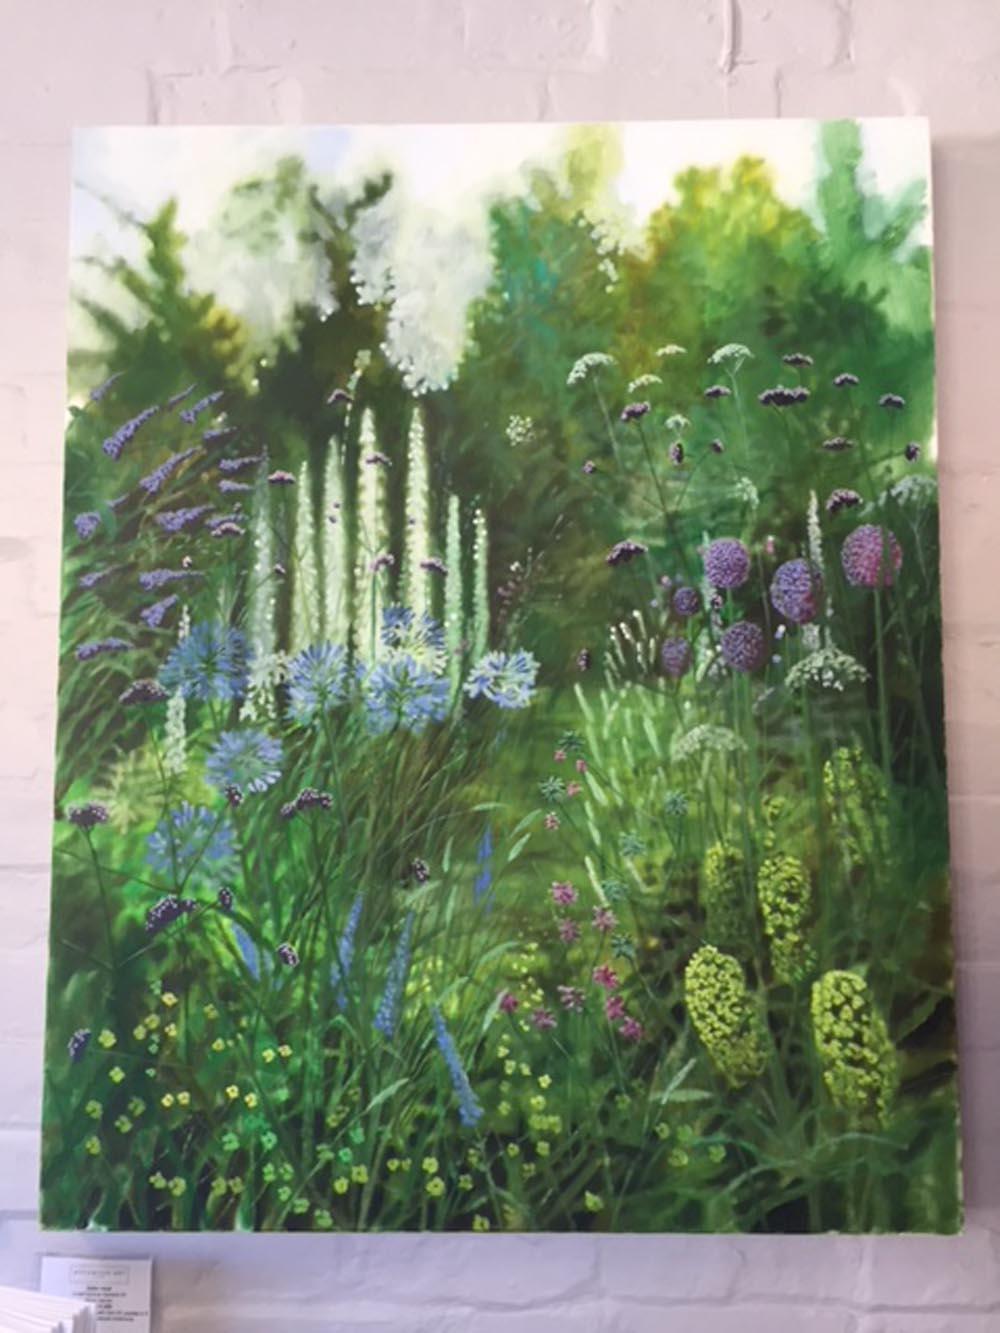 Dorset Garden X, flowers, realist painting for sale, oil on canvas  - Realist Painting by Dylan Lloyd